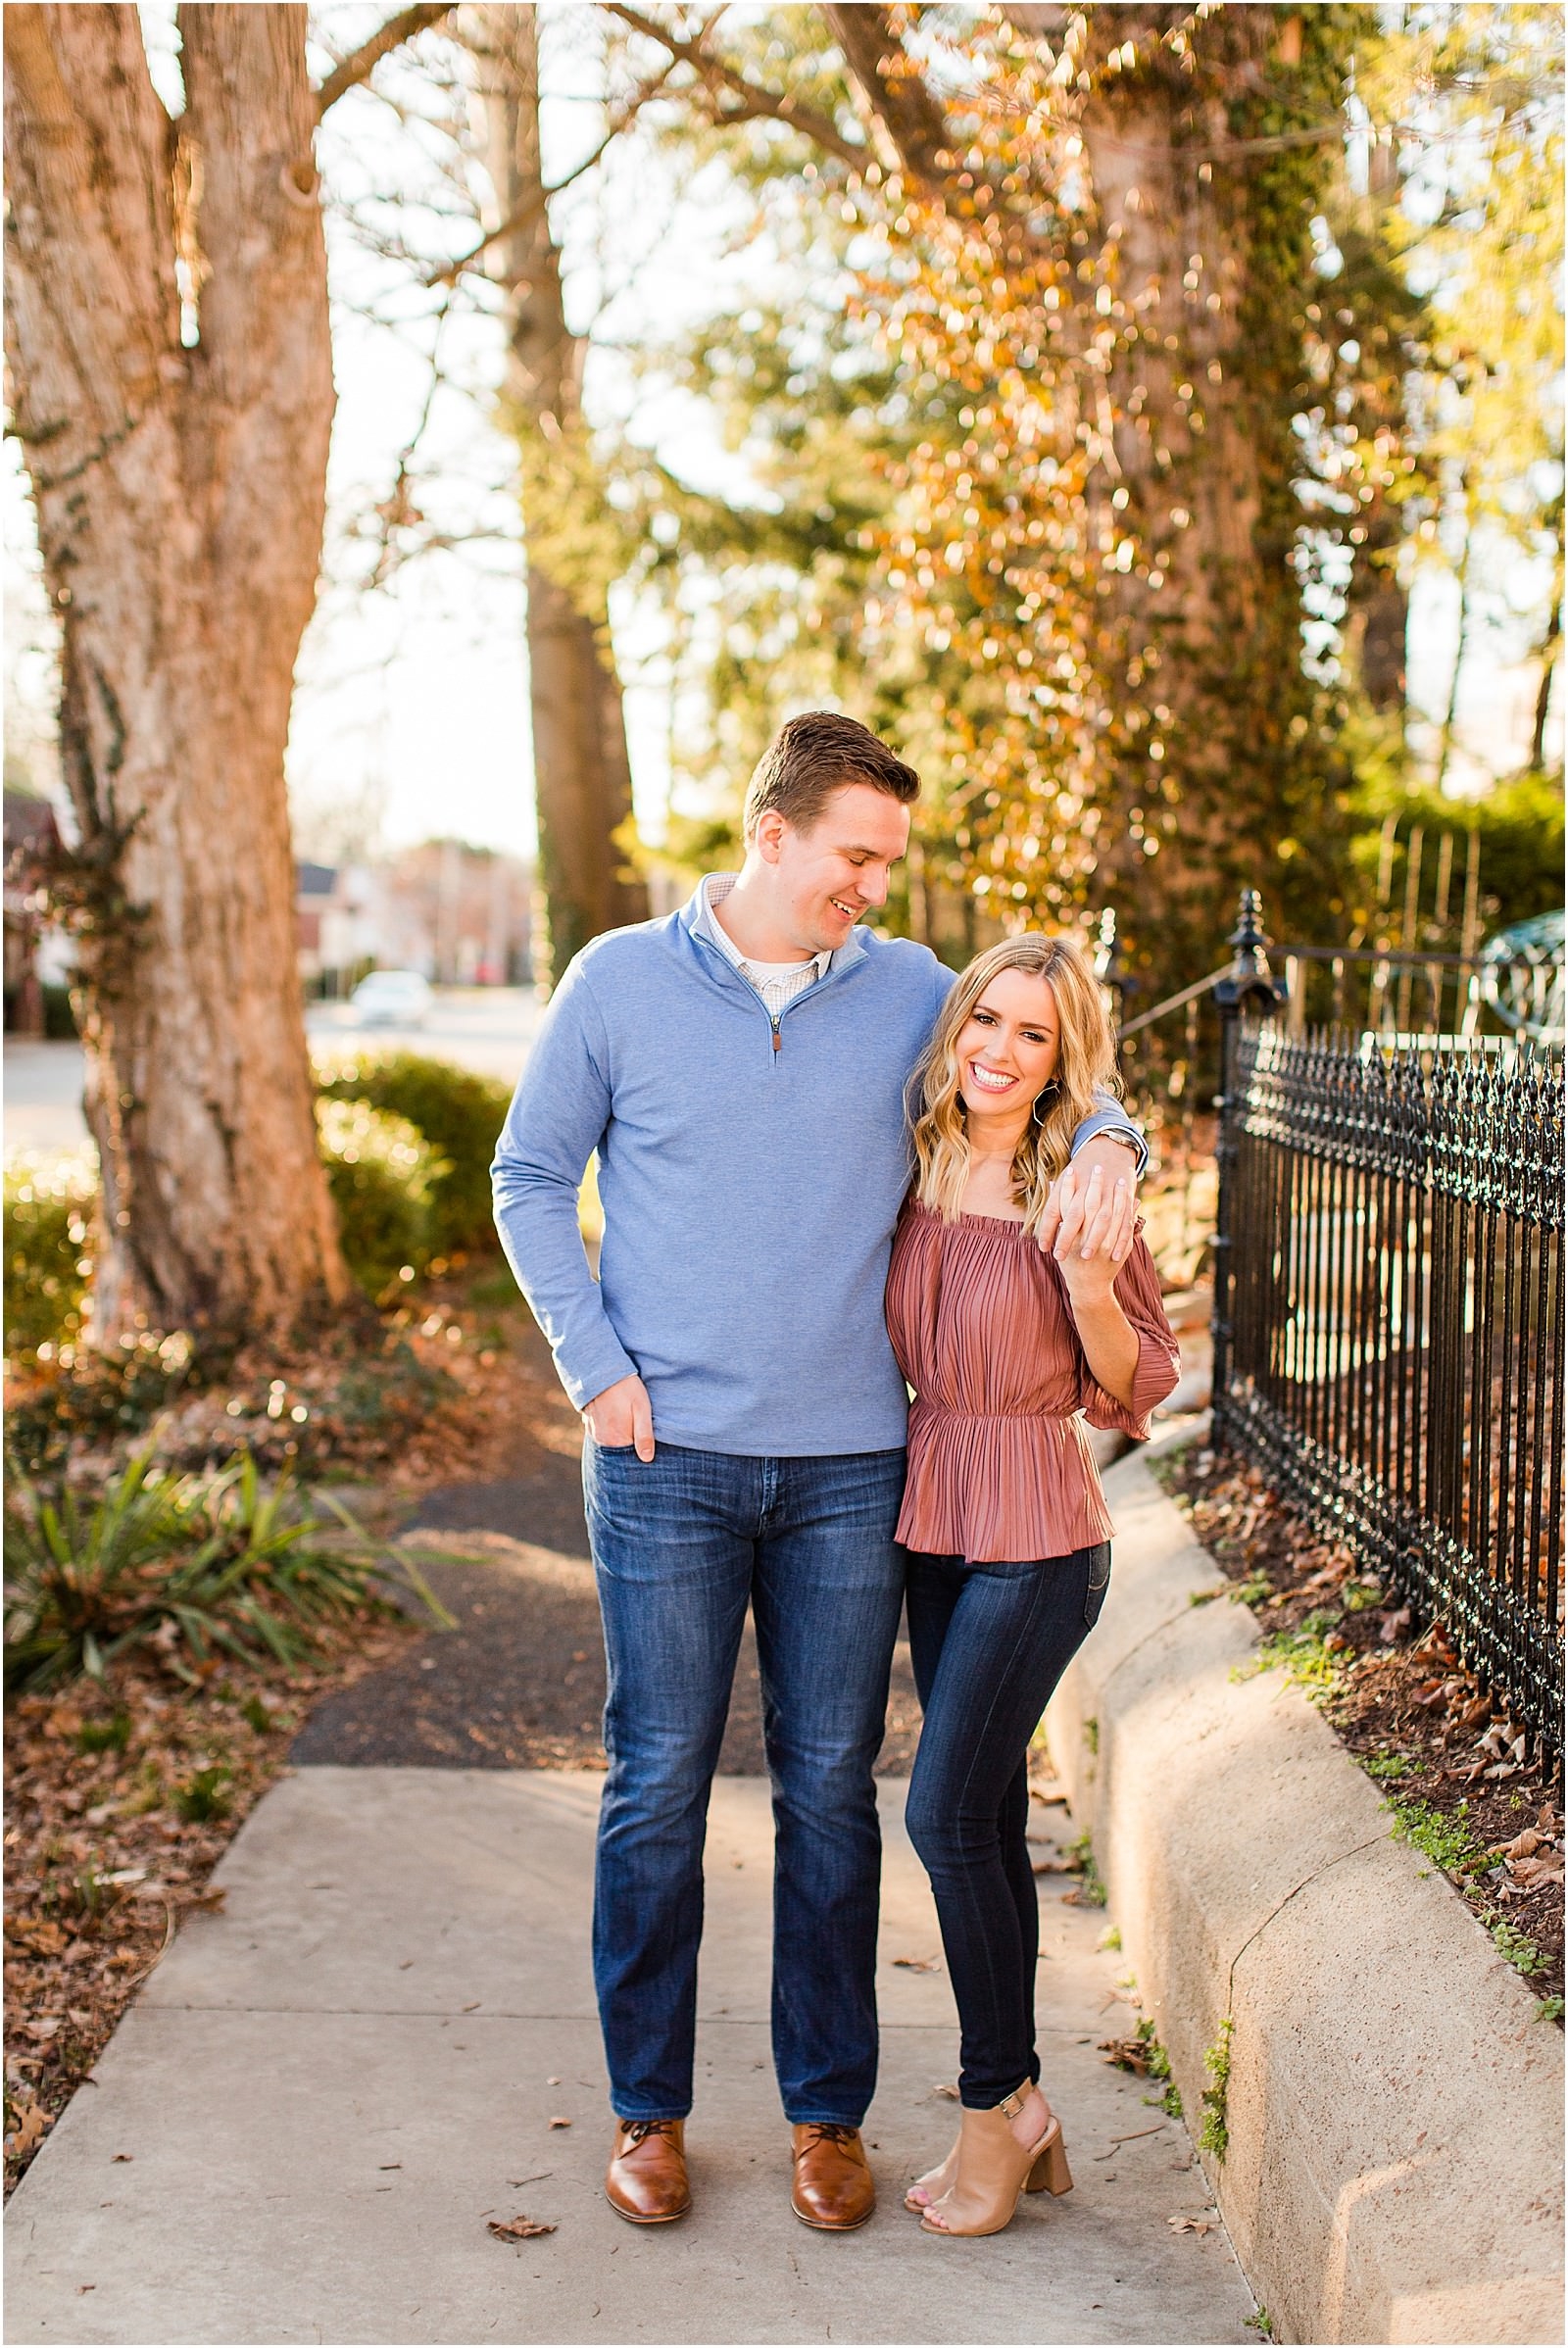 Madison and Christaan | A 20 West Engagement Session in Downto wn Newburgh | Bret and Brandie Photography028.jpg